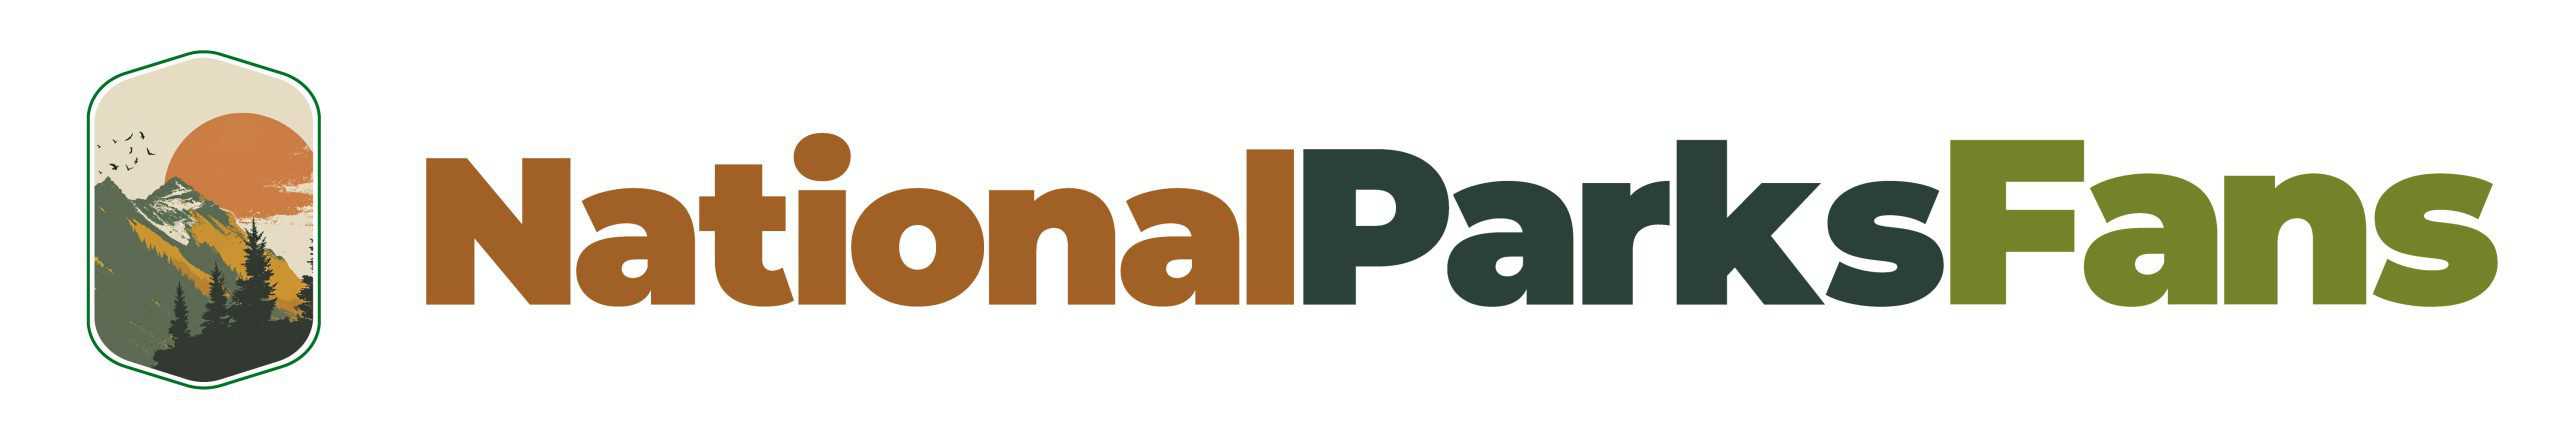 Logo and Title for NationalParksFans.com A website for those who have interest in the National Parks in the United States